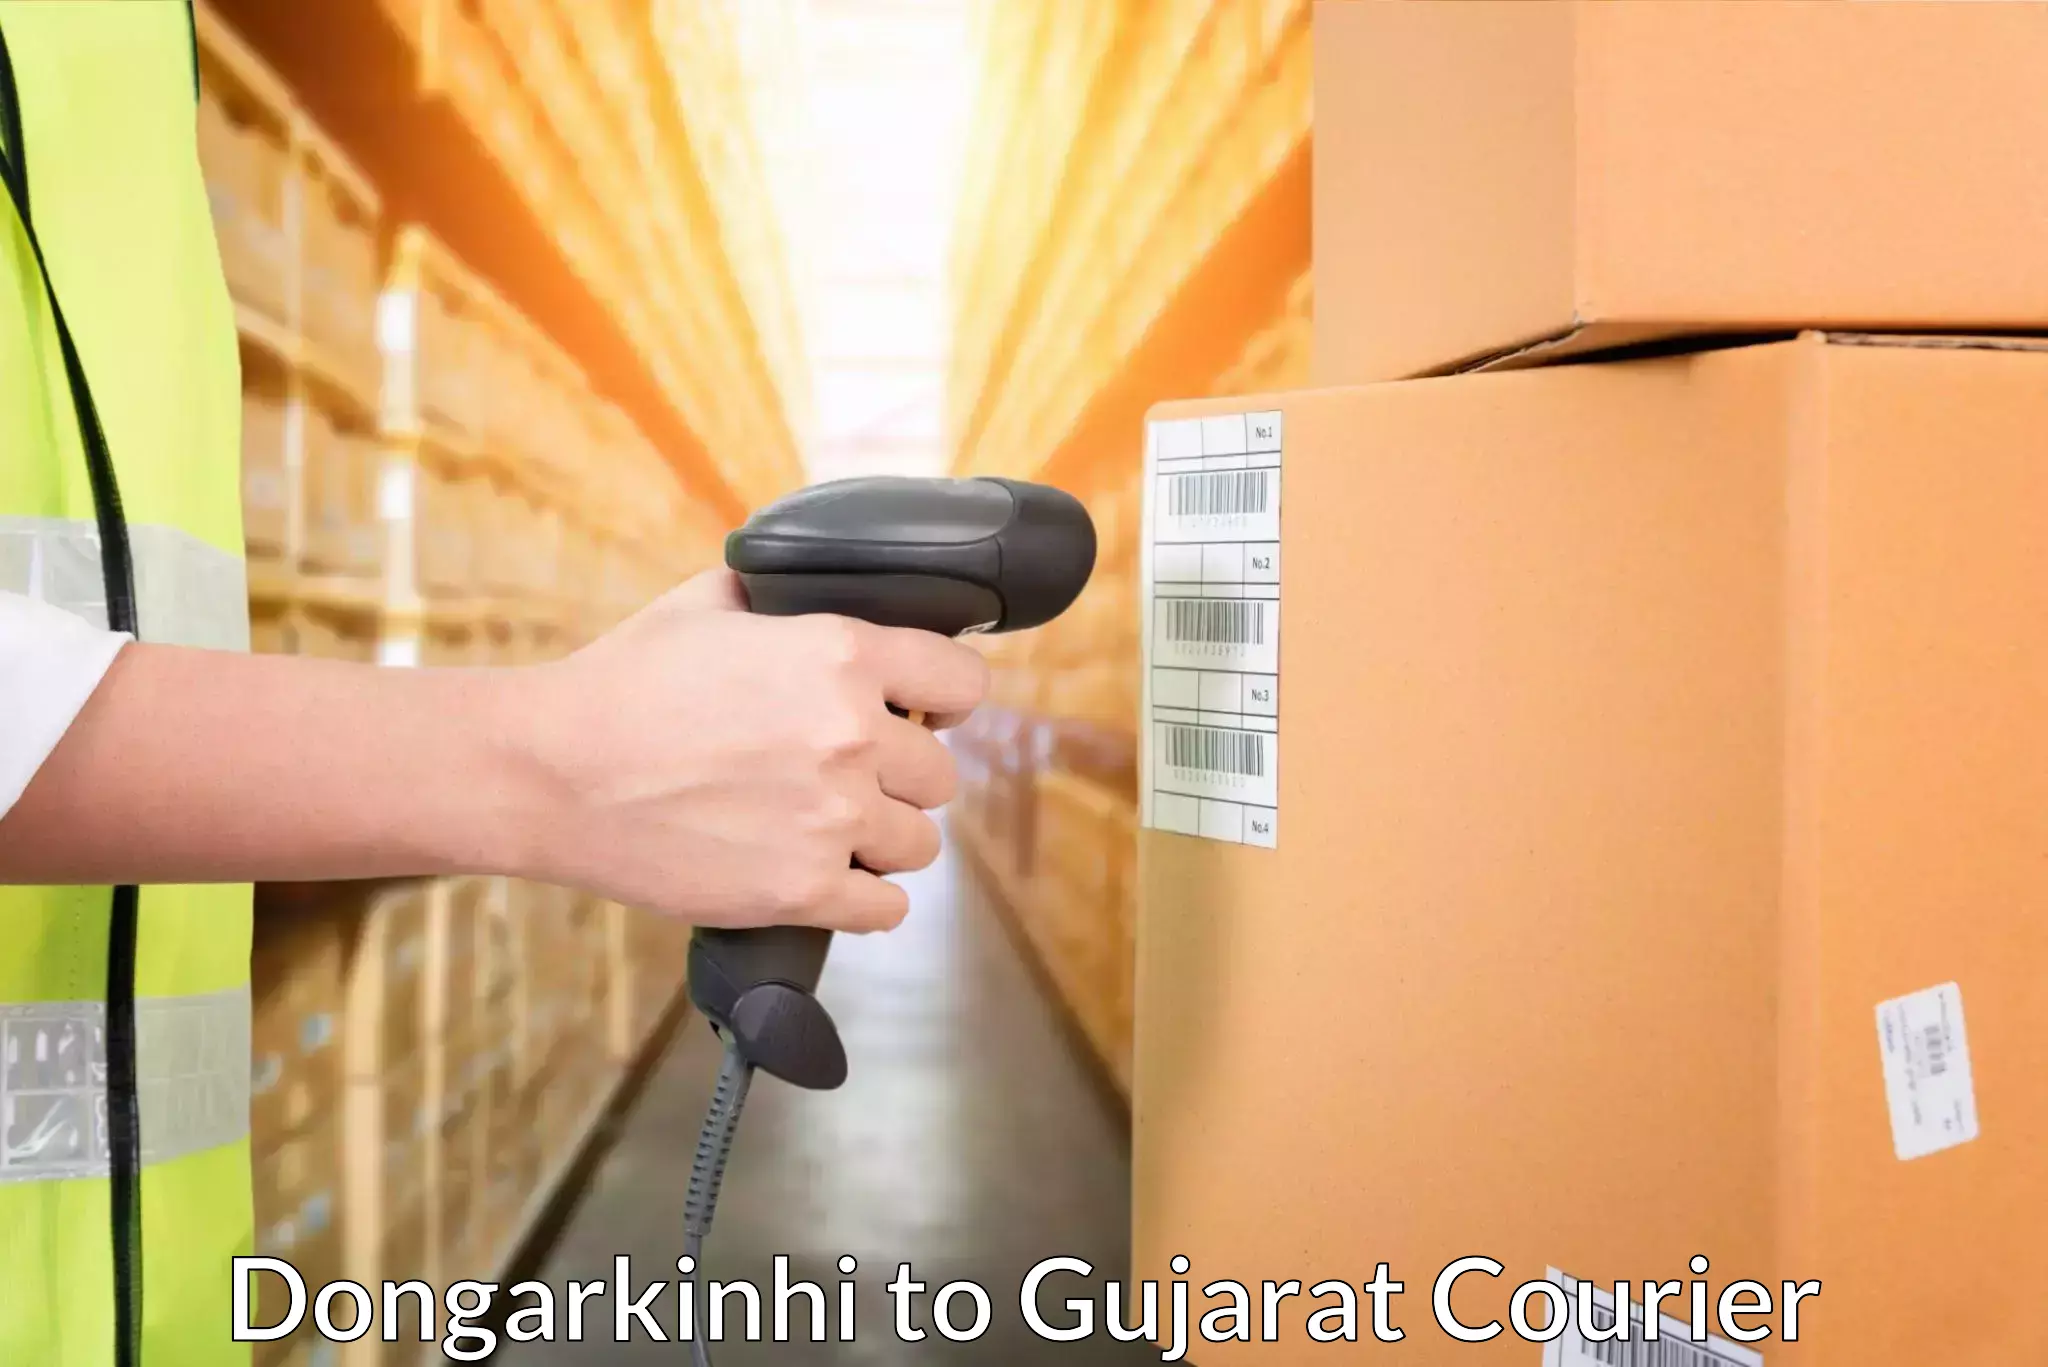 Professional courier services Dongarkinhi to Rajkot